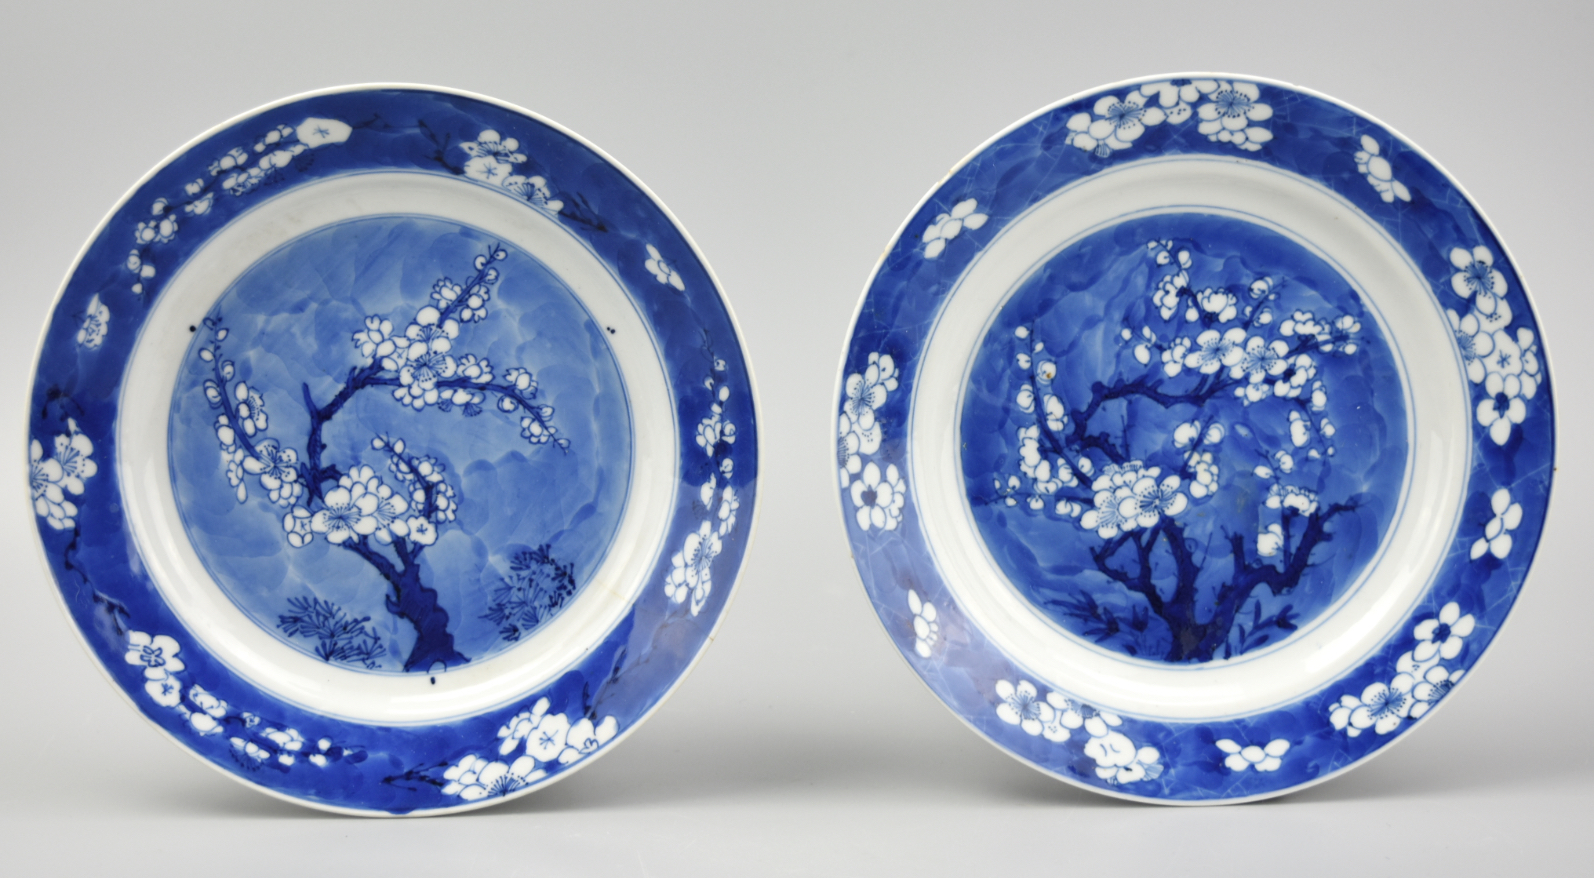 TWO CHINESE BLUE WHITE PLATE 2cf7be